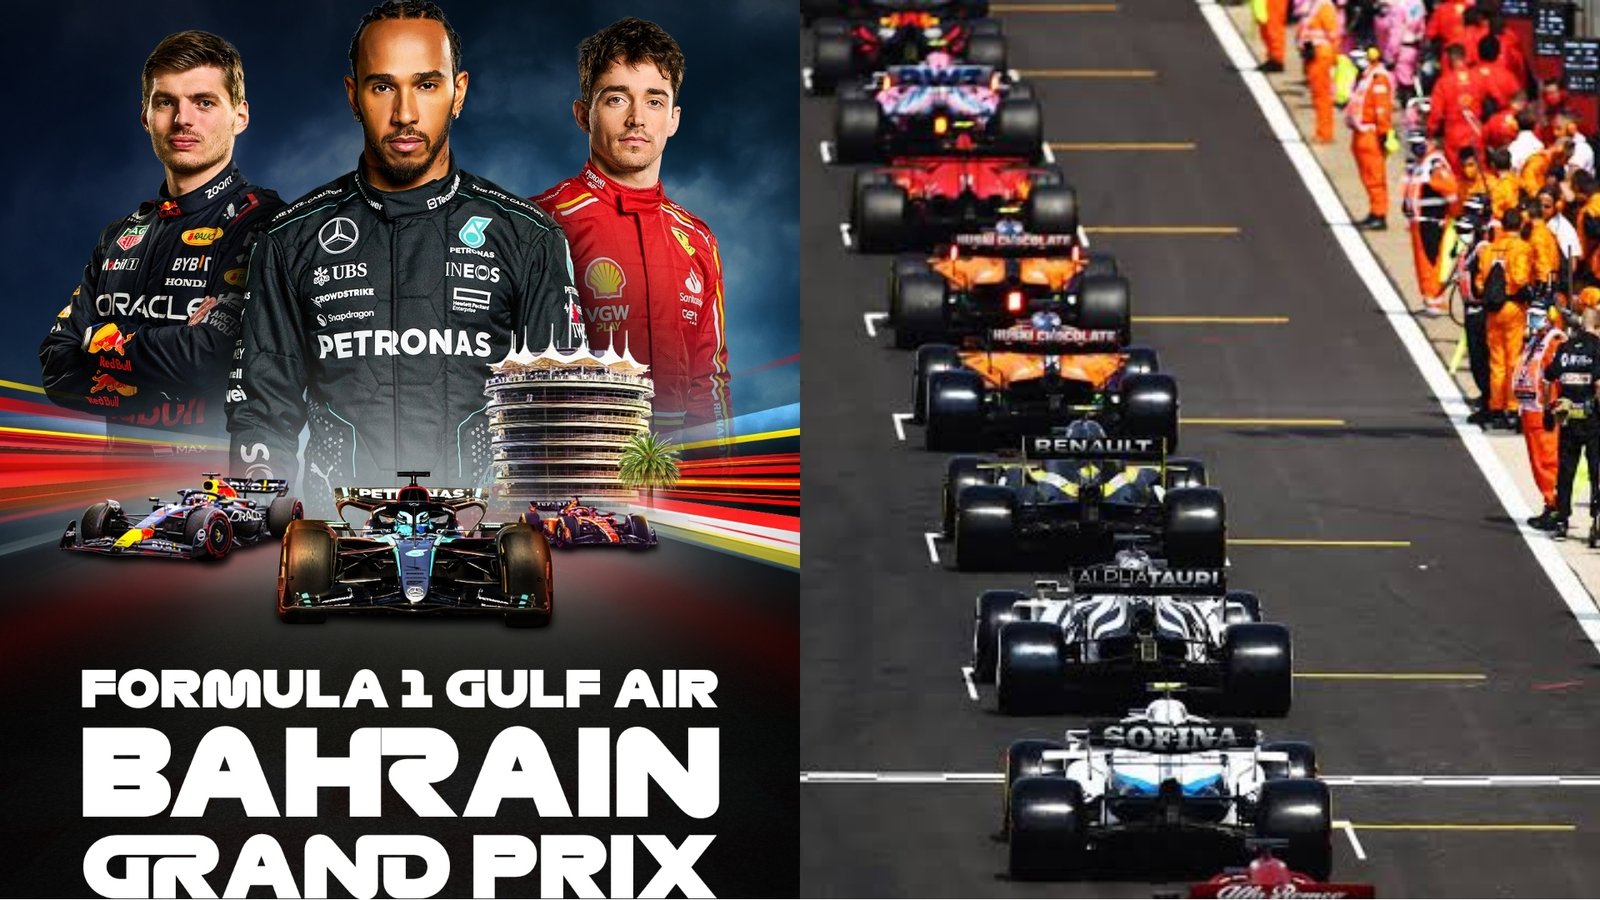 Formula 1 Streams Where to Watch Bahrain Grand Prix? How Much Does It